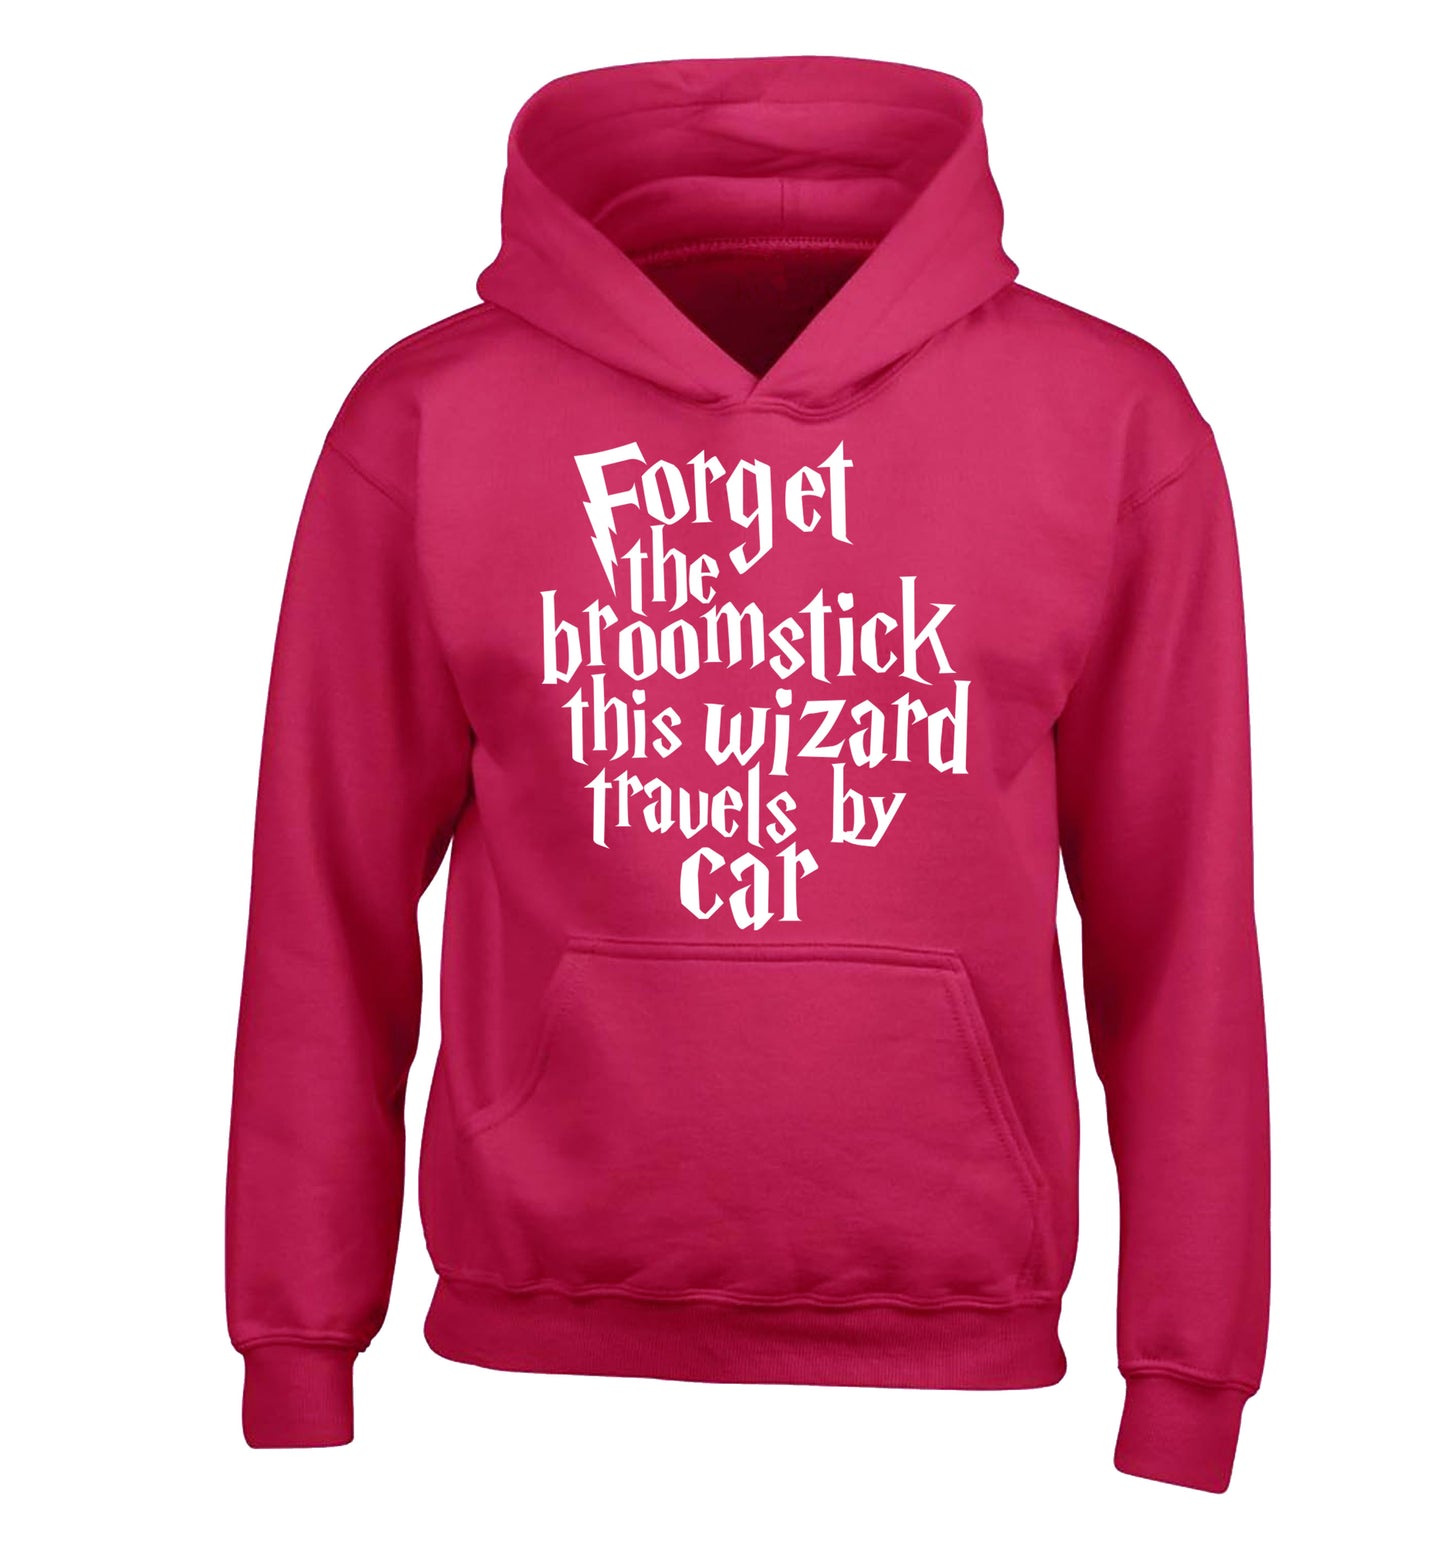 Forget the broomstick this wizard travels by car children's pink hoodie 12-14 Years